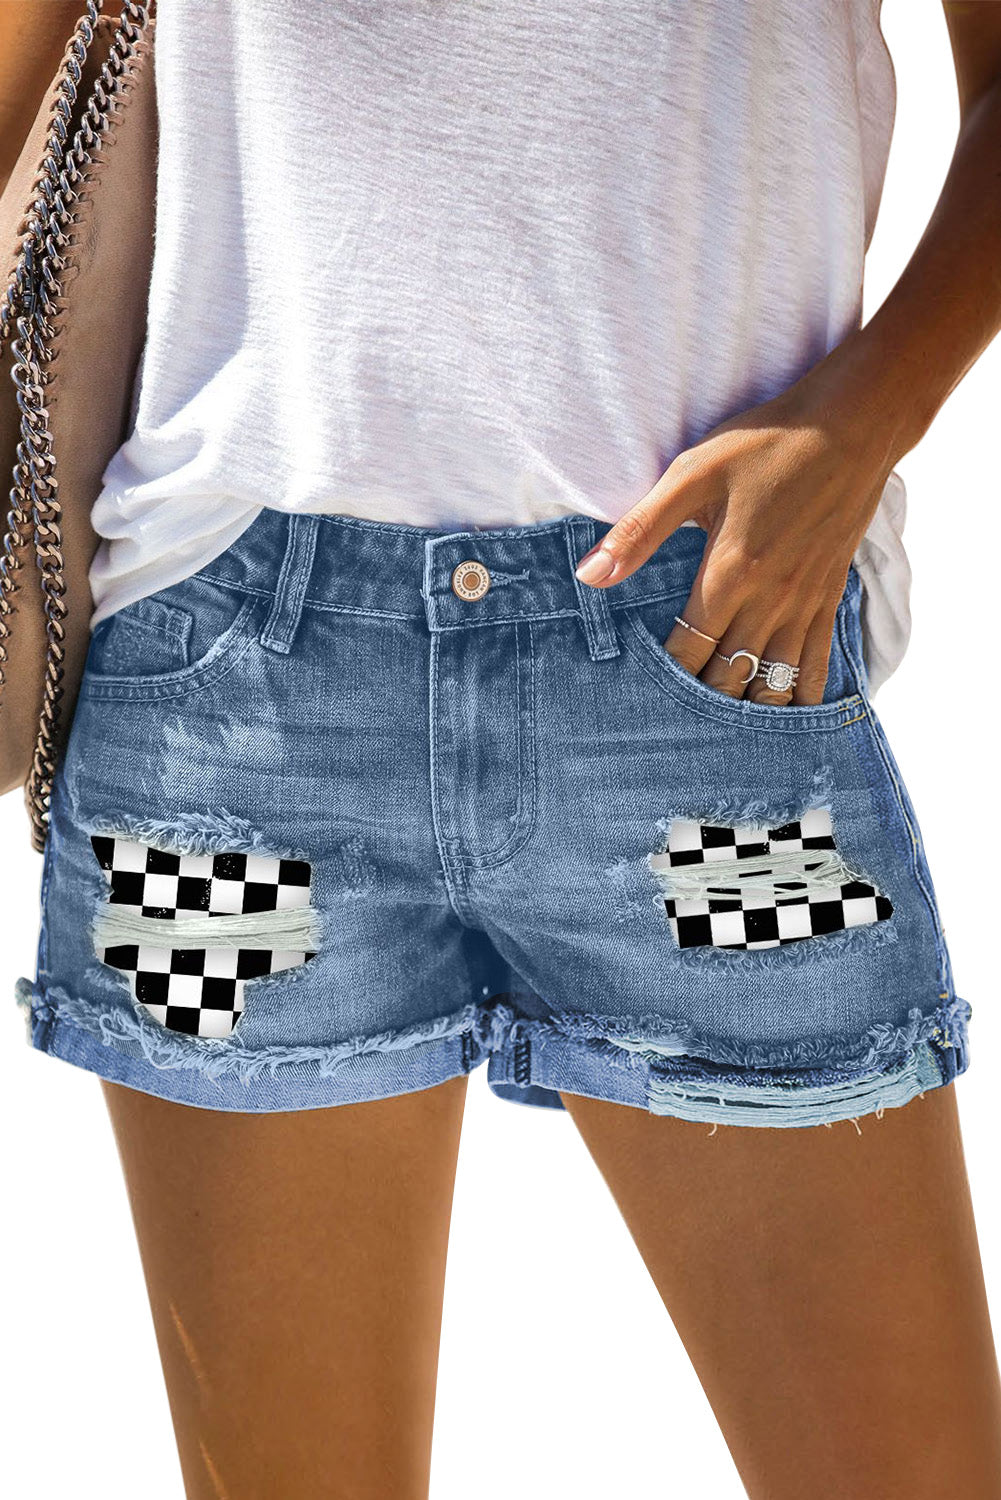 Sky Blue Denim Shorts Sexy Casual Summer Shorts Mid Rise Distressed Shorts LC7831020-704